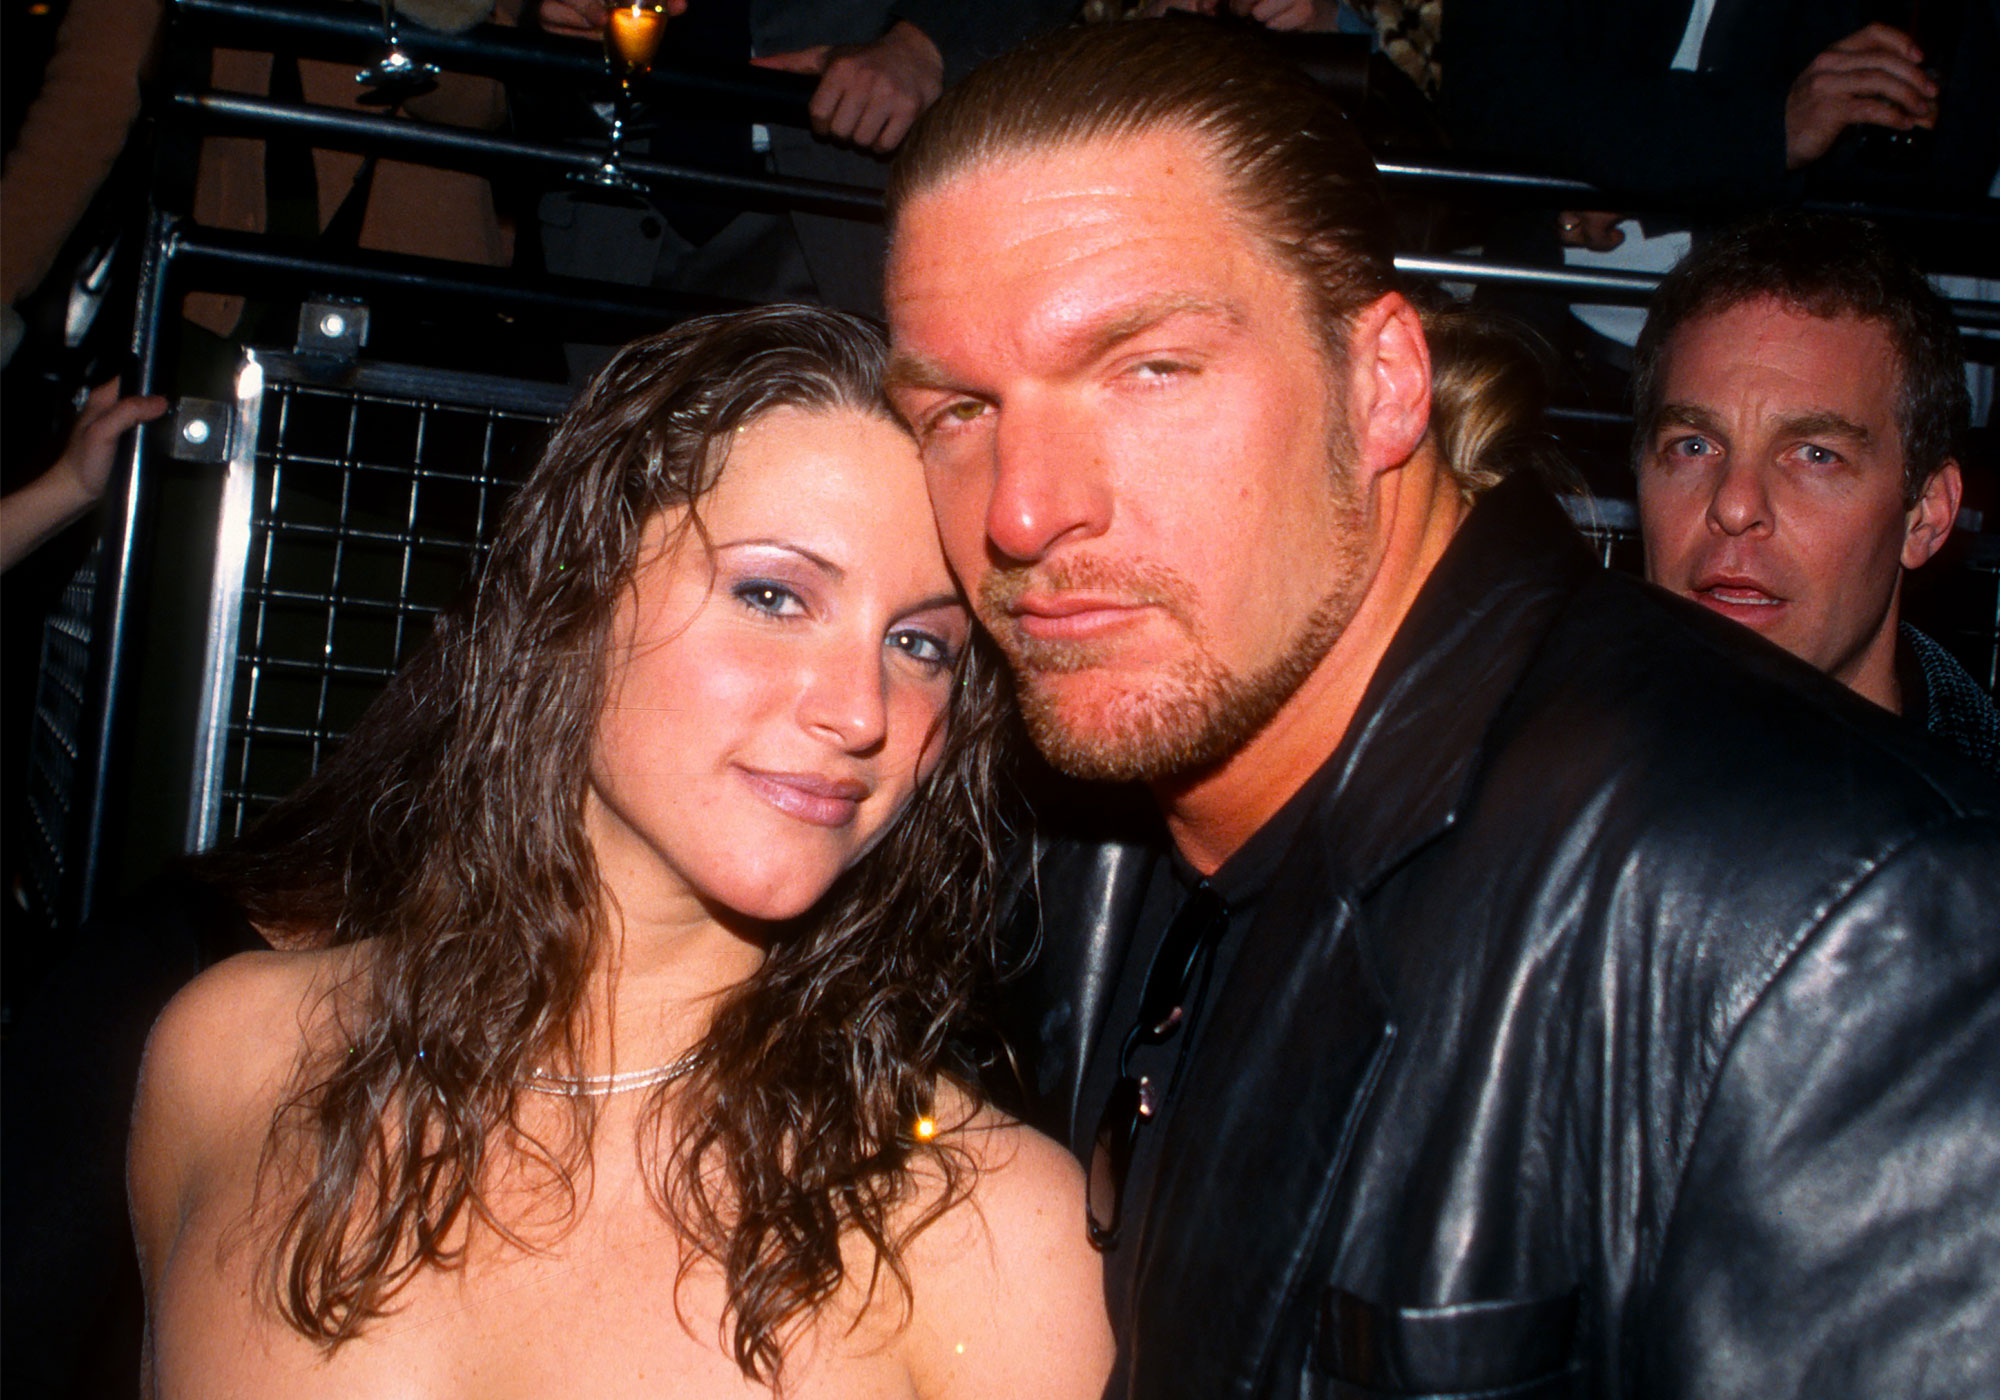 Wwe S Stephanie Mcmahon And Wrestler Triple H’s Relationship Timeline